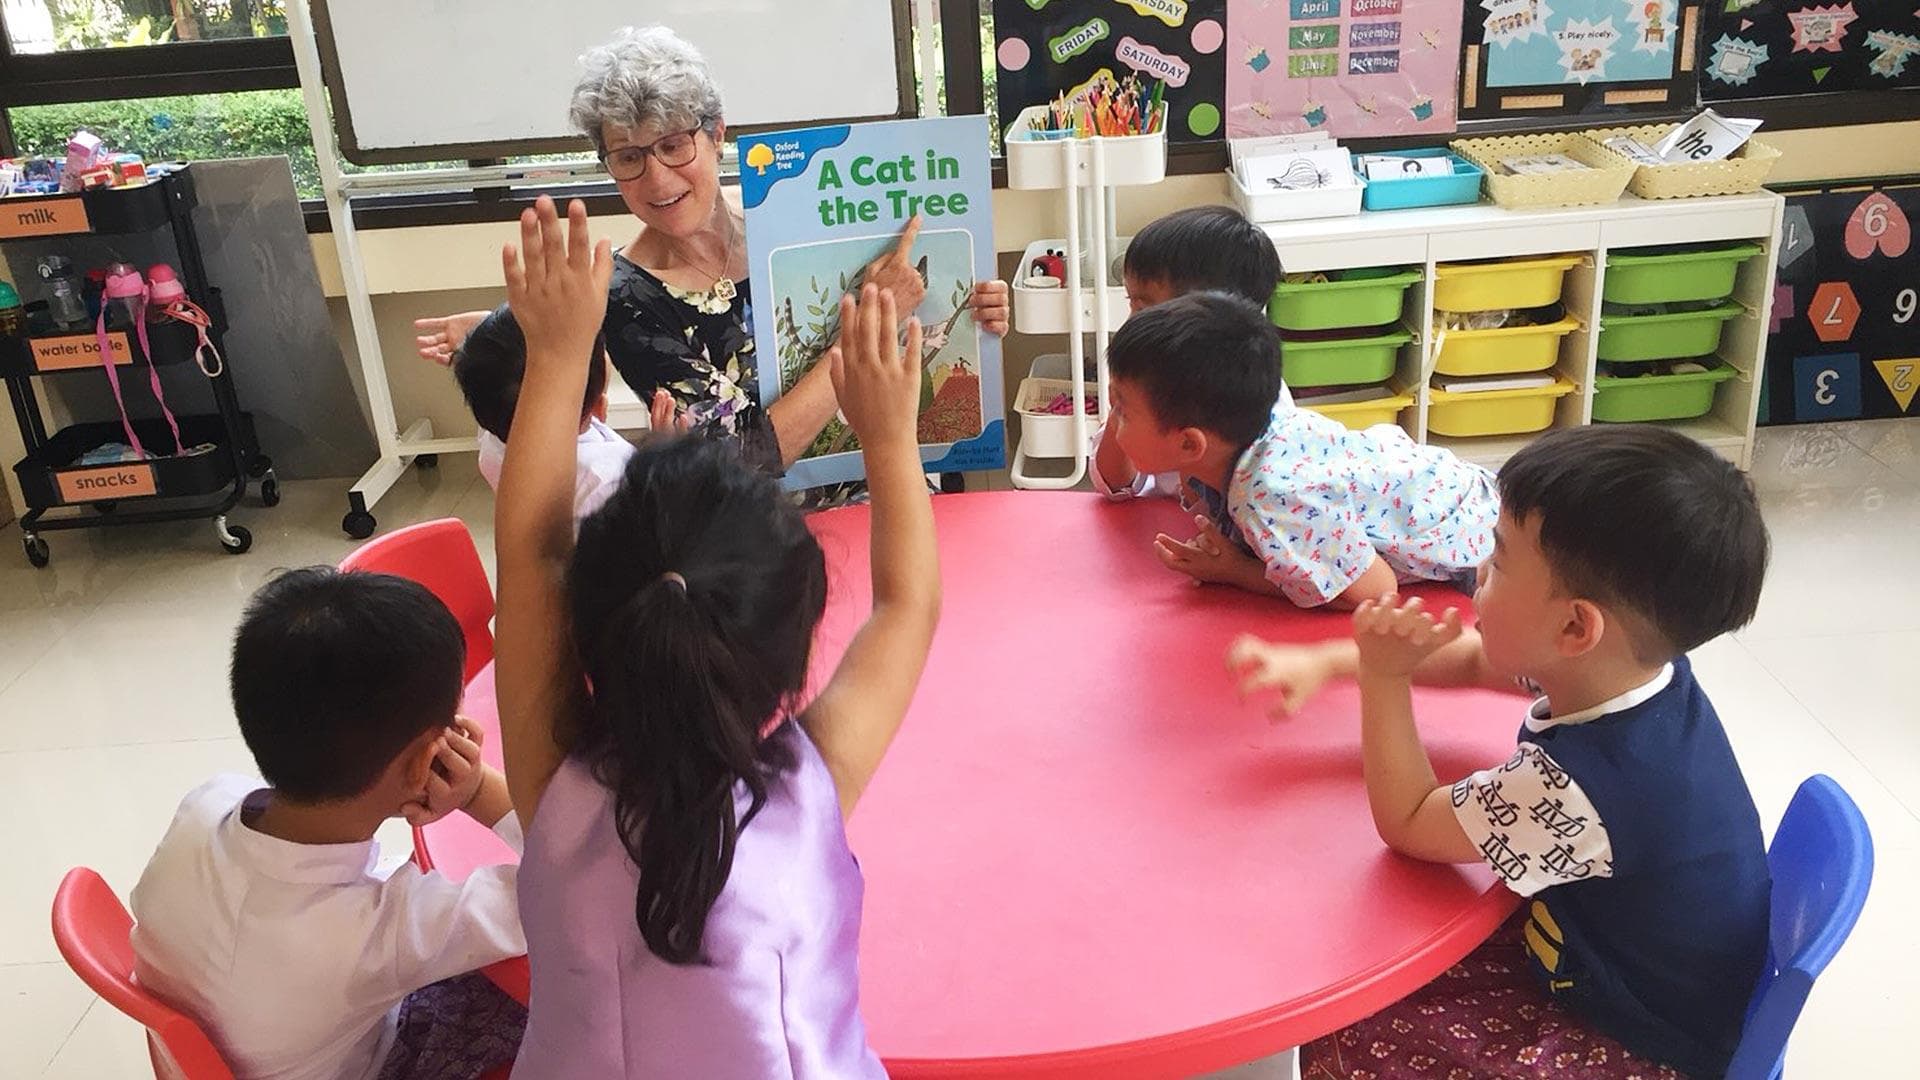 Dian Seidel points to the words "A Cat in the Tree" as kindergarteners watch in a classroom